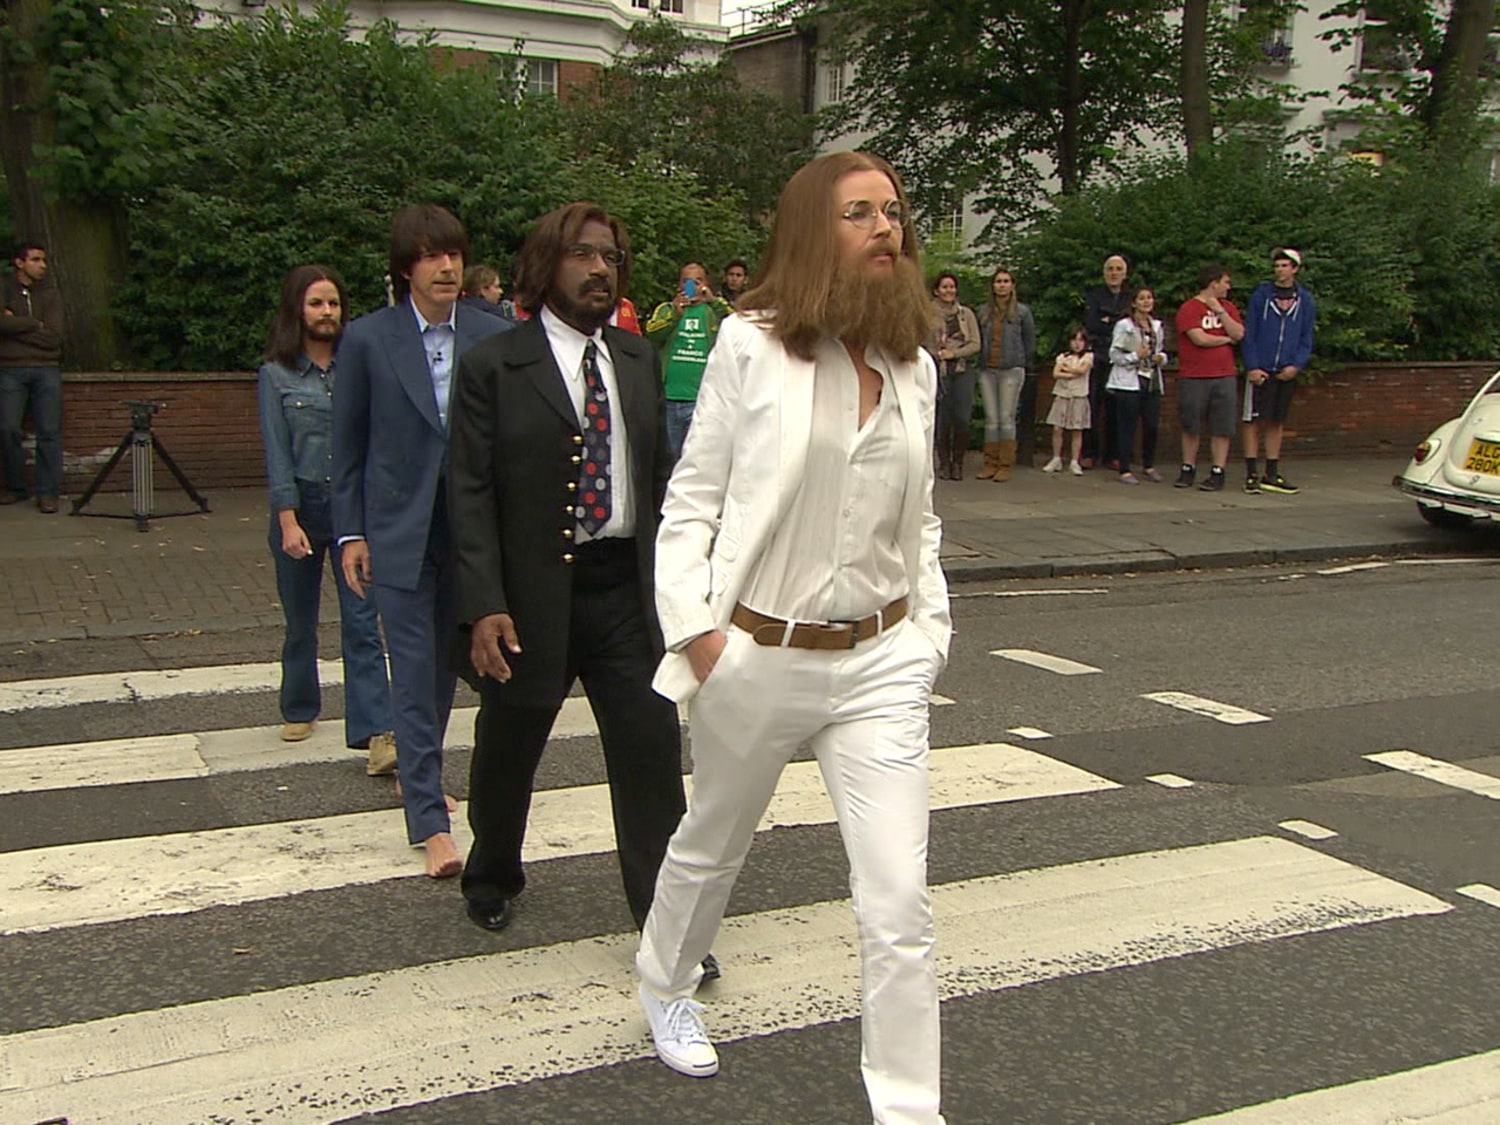 Beatles crossed 'Abbey Road' into history 45 years ago